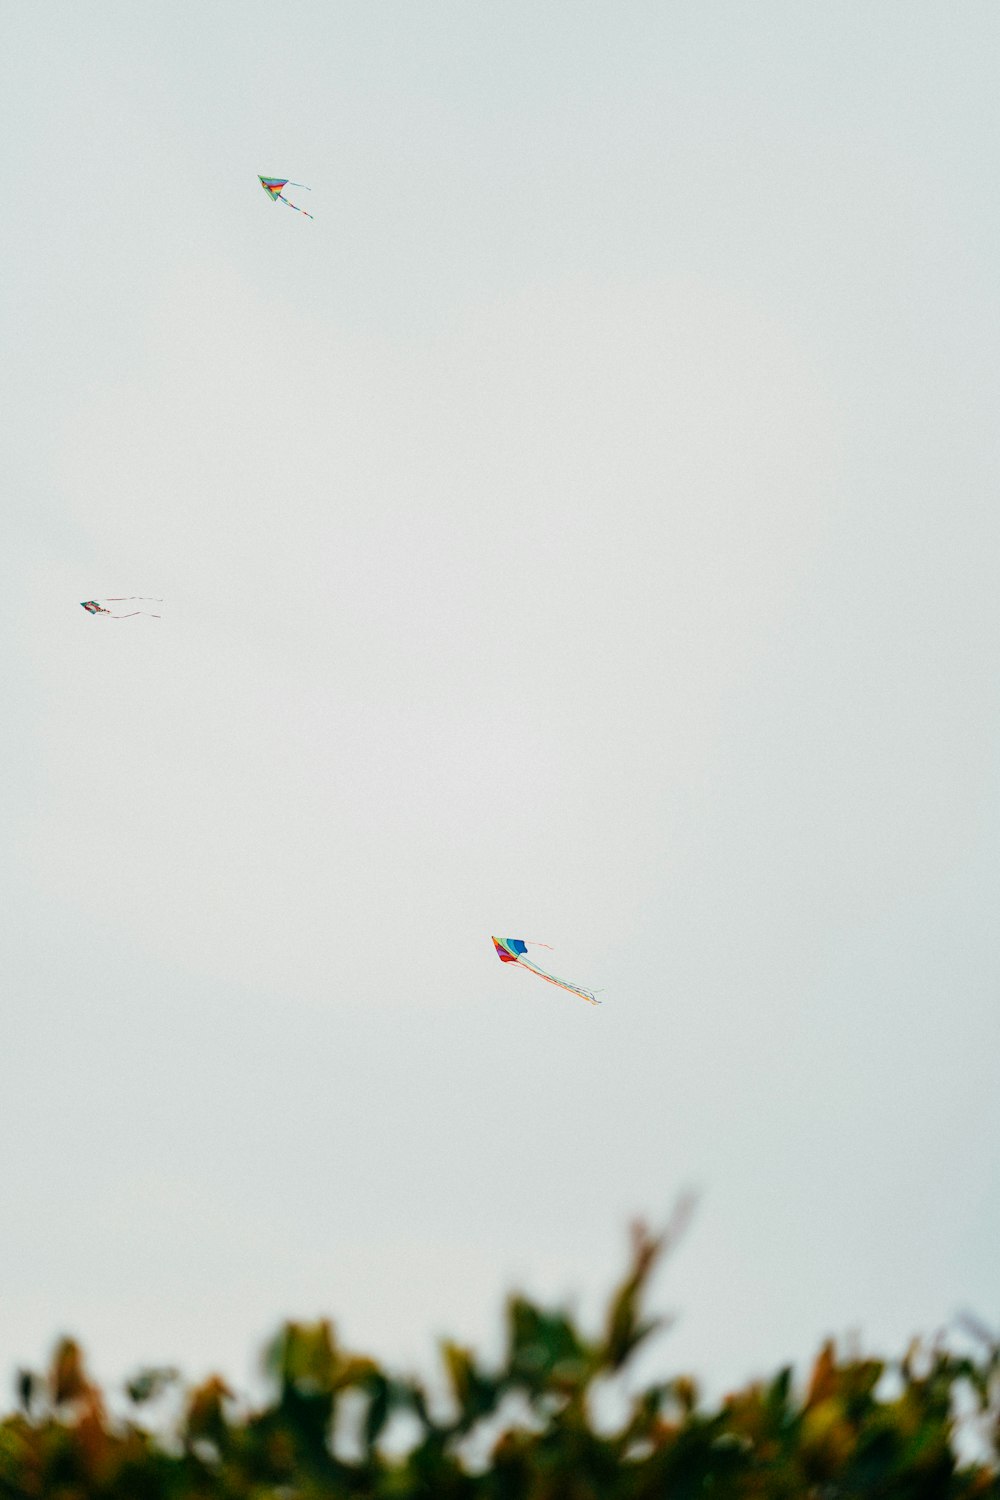 a group of kites flying through a cloudy sky